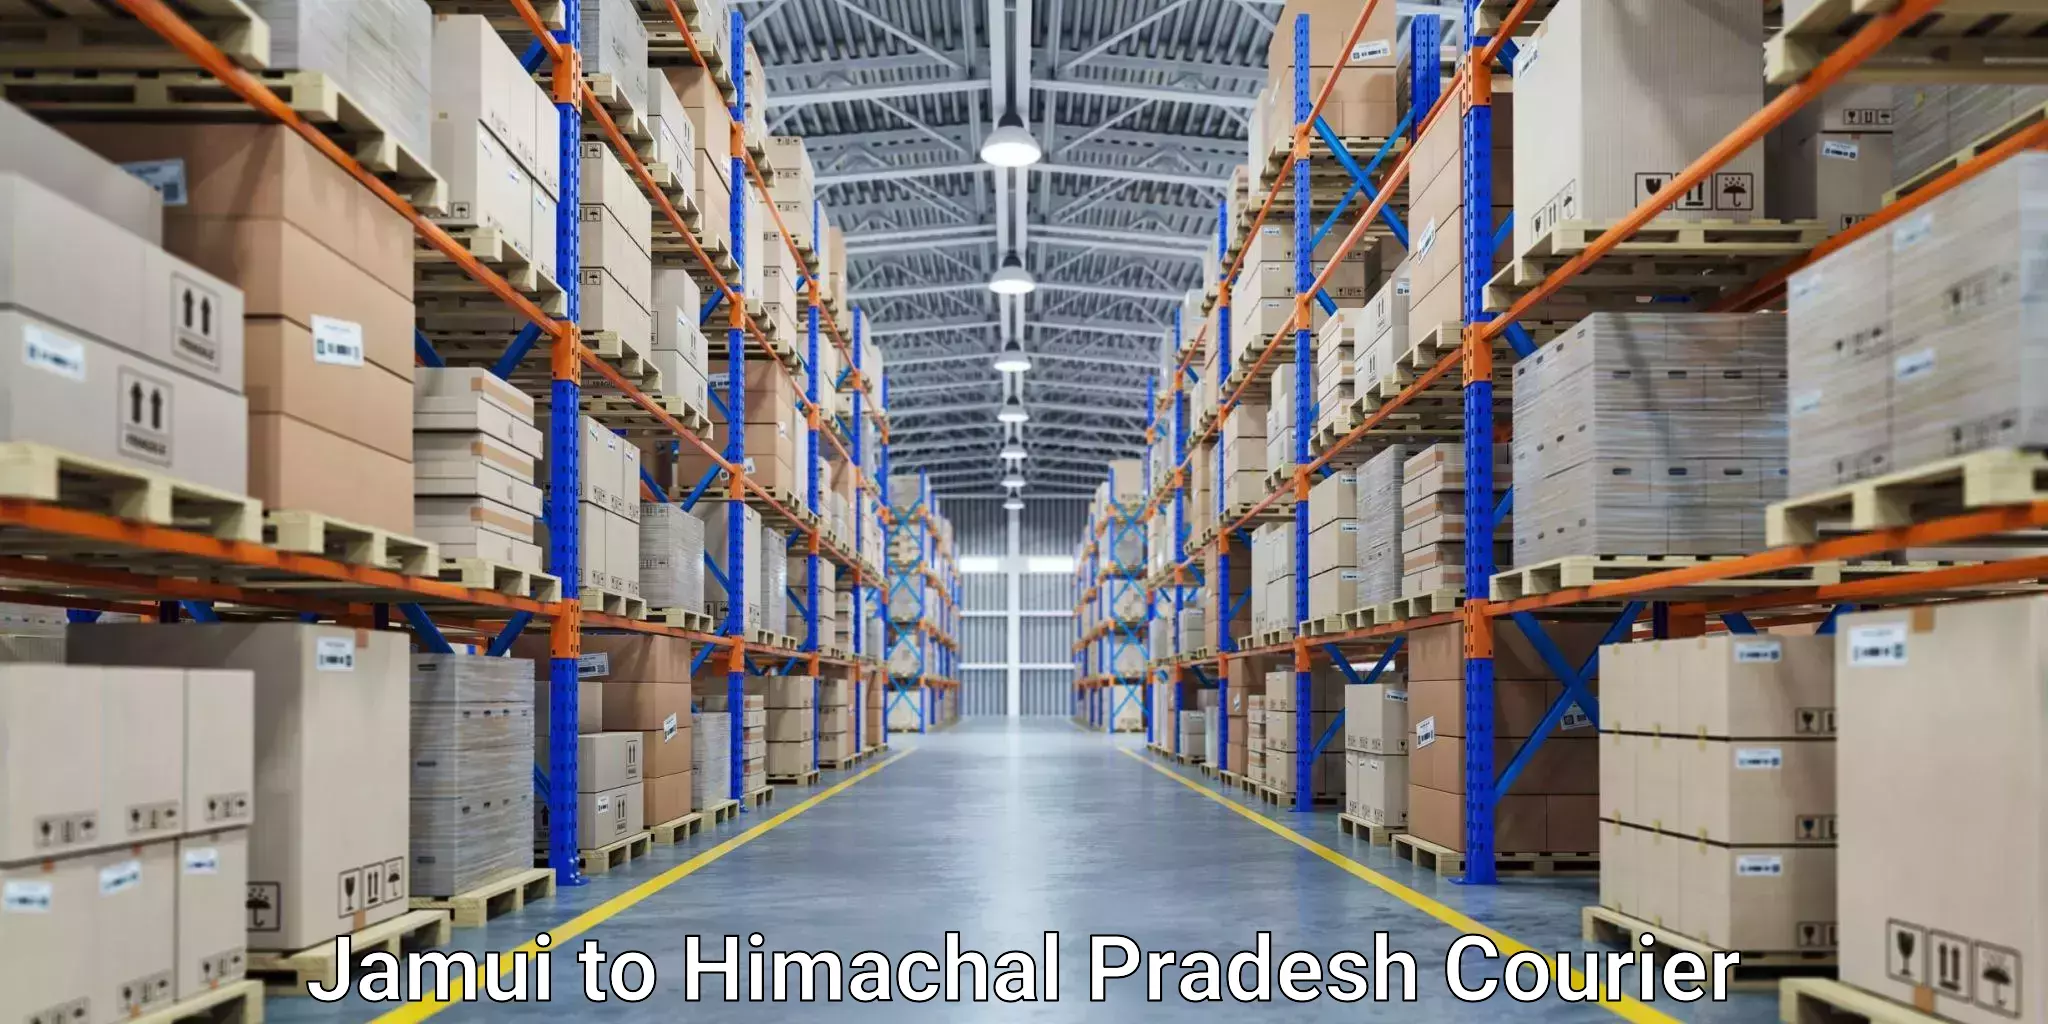 Multi-national courier services Jamui to Himachal Pradesh